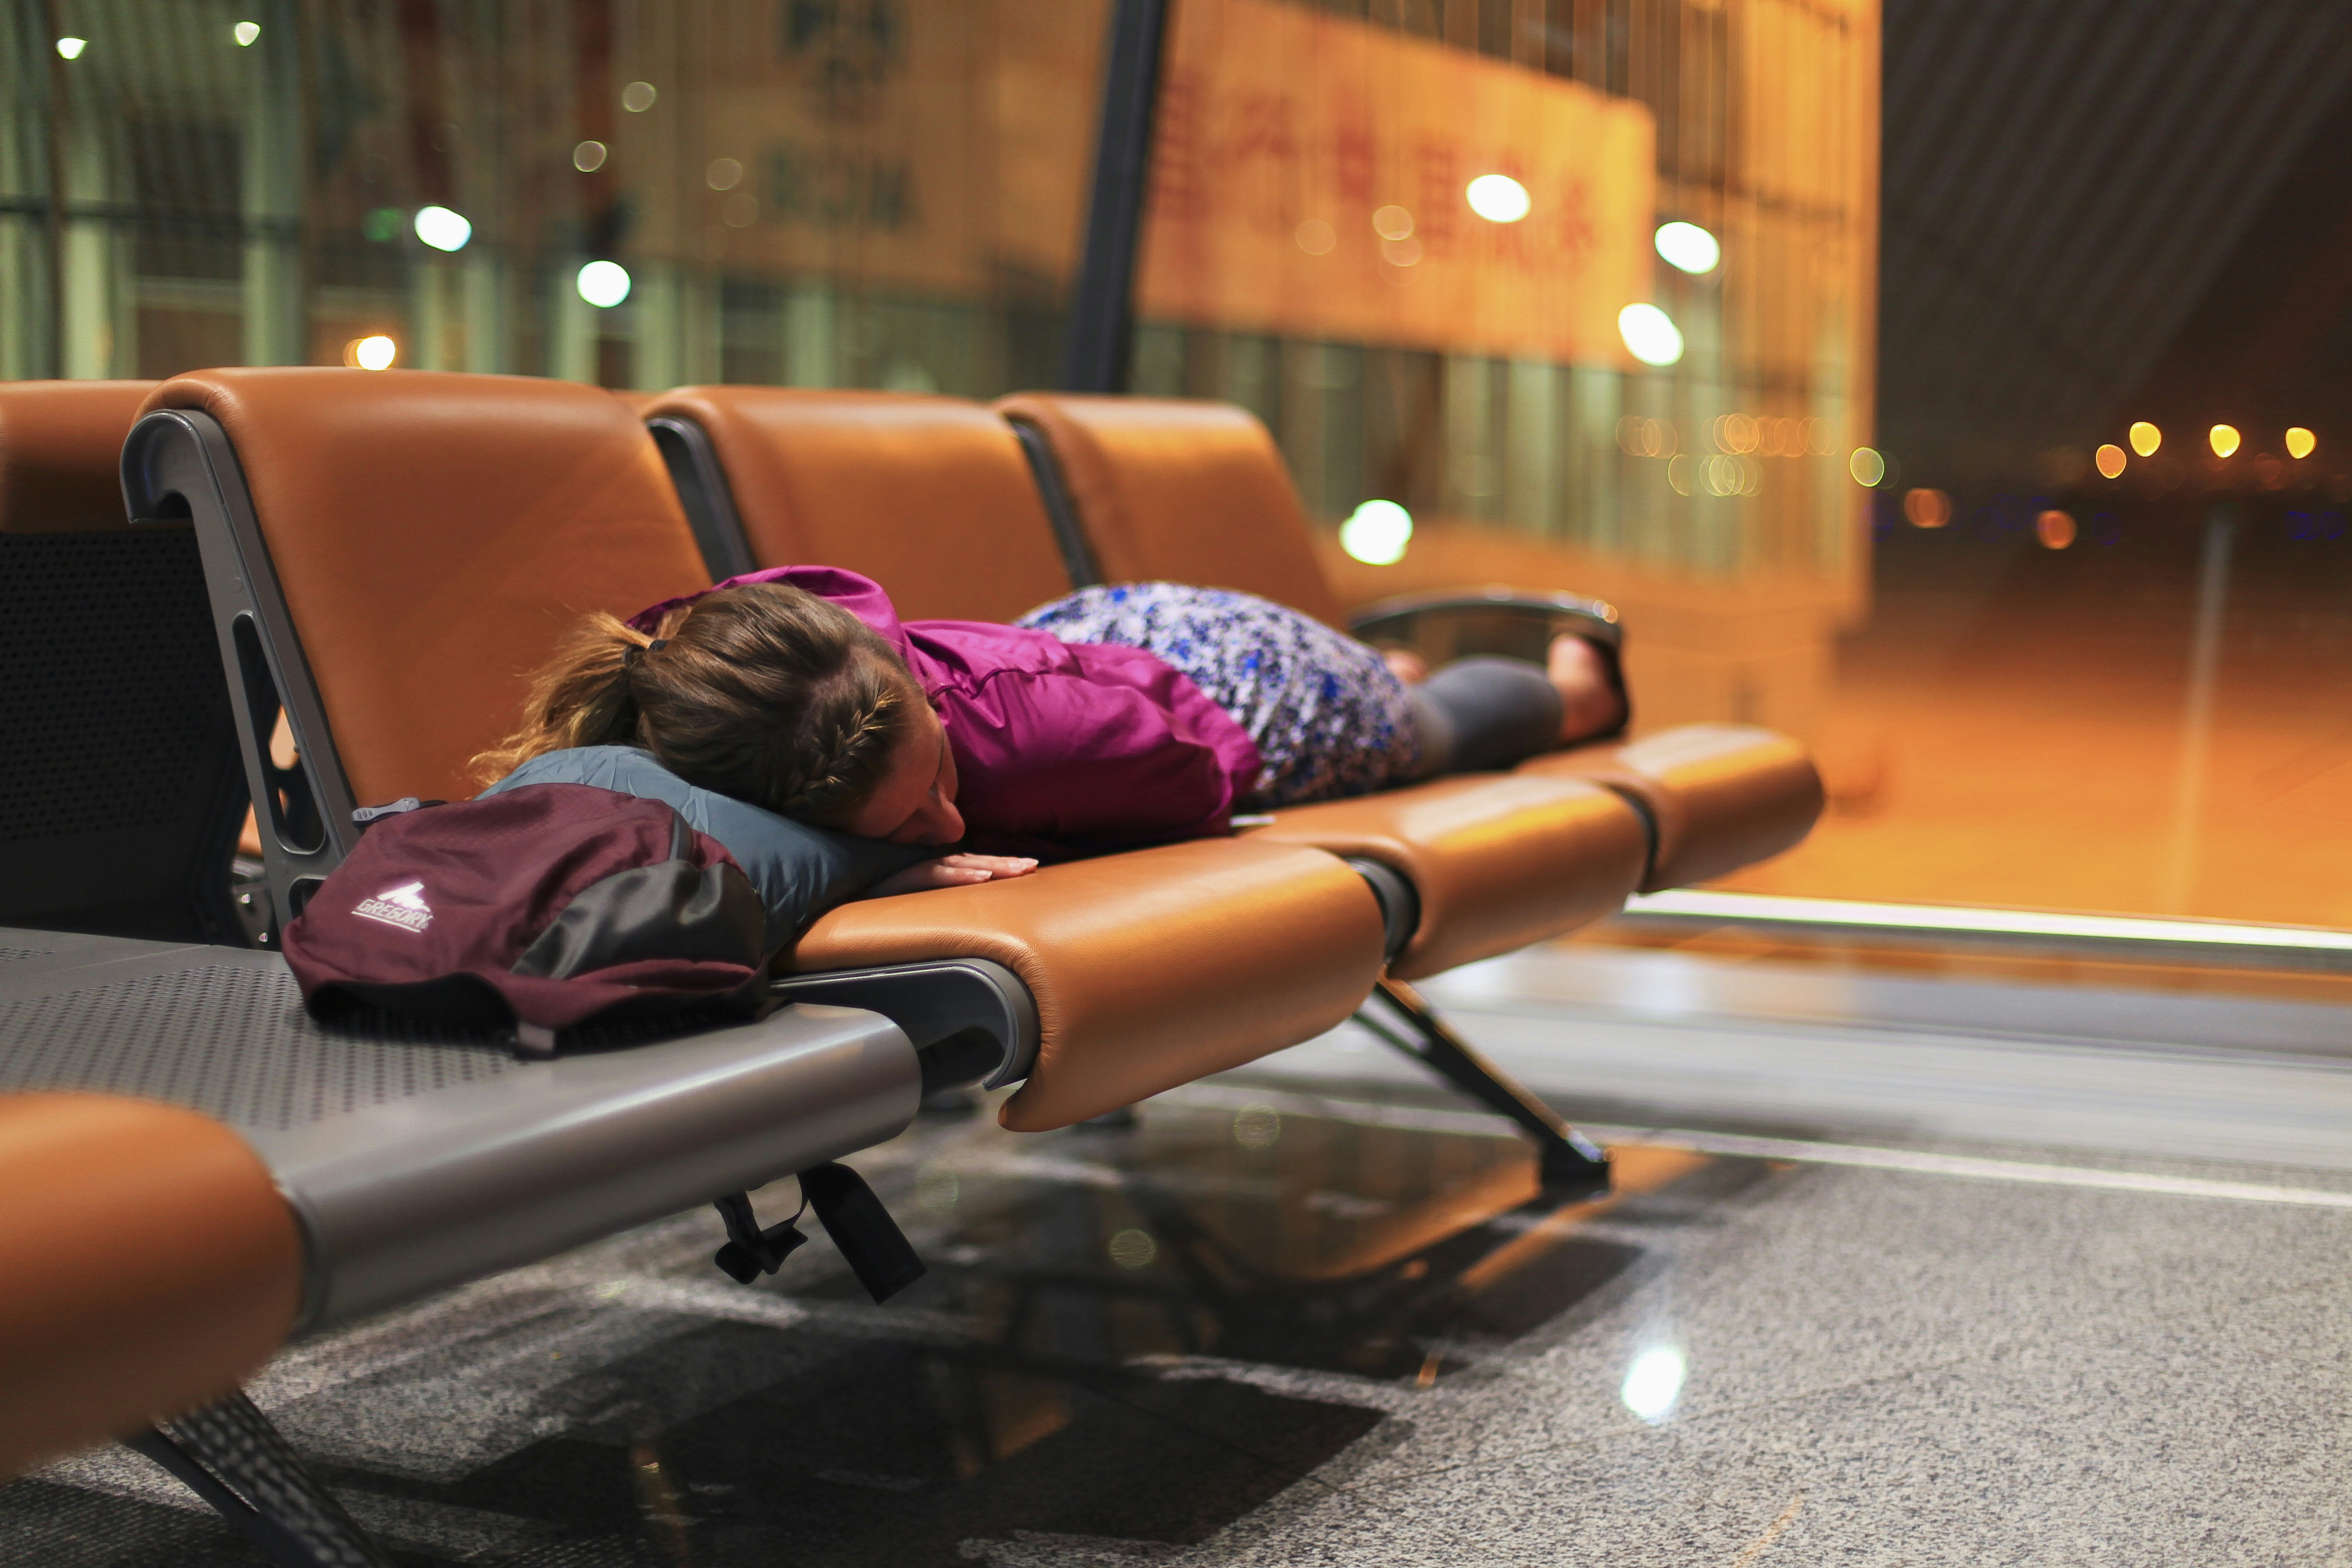 A woman sleeps on an orange bench in an airport in front of a large window. 